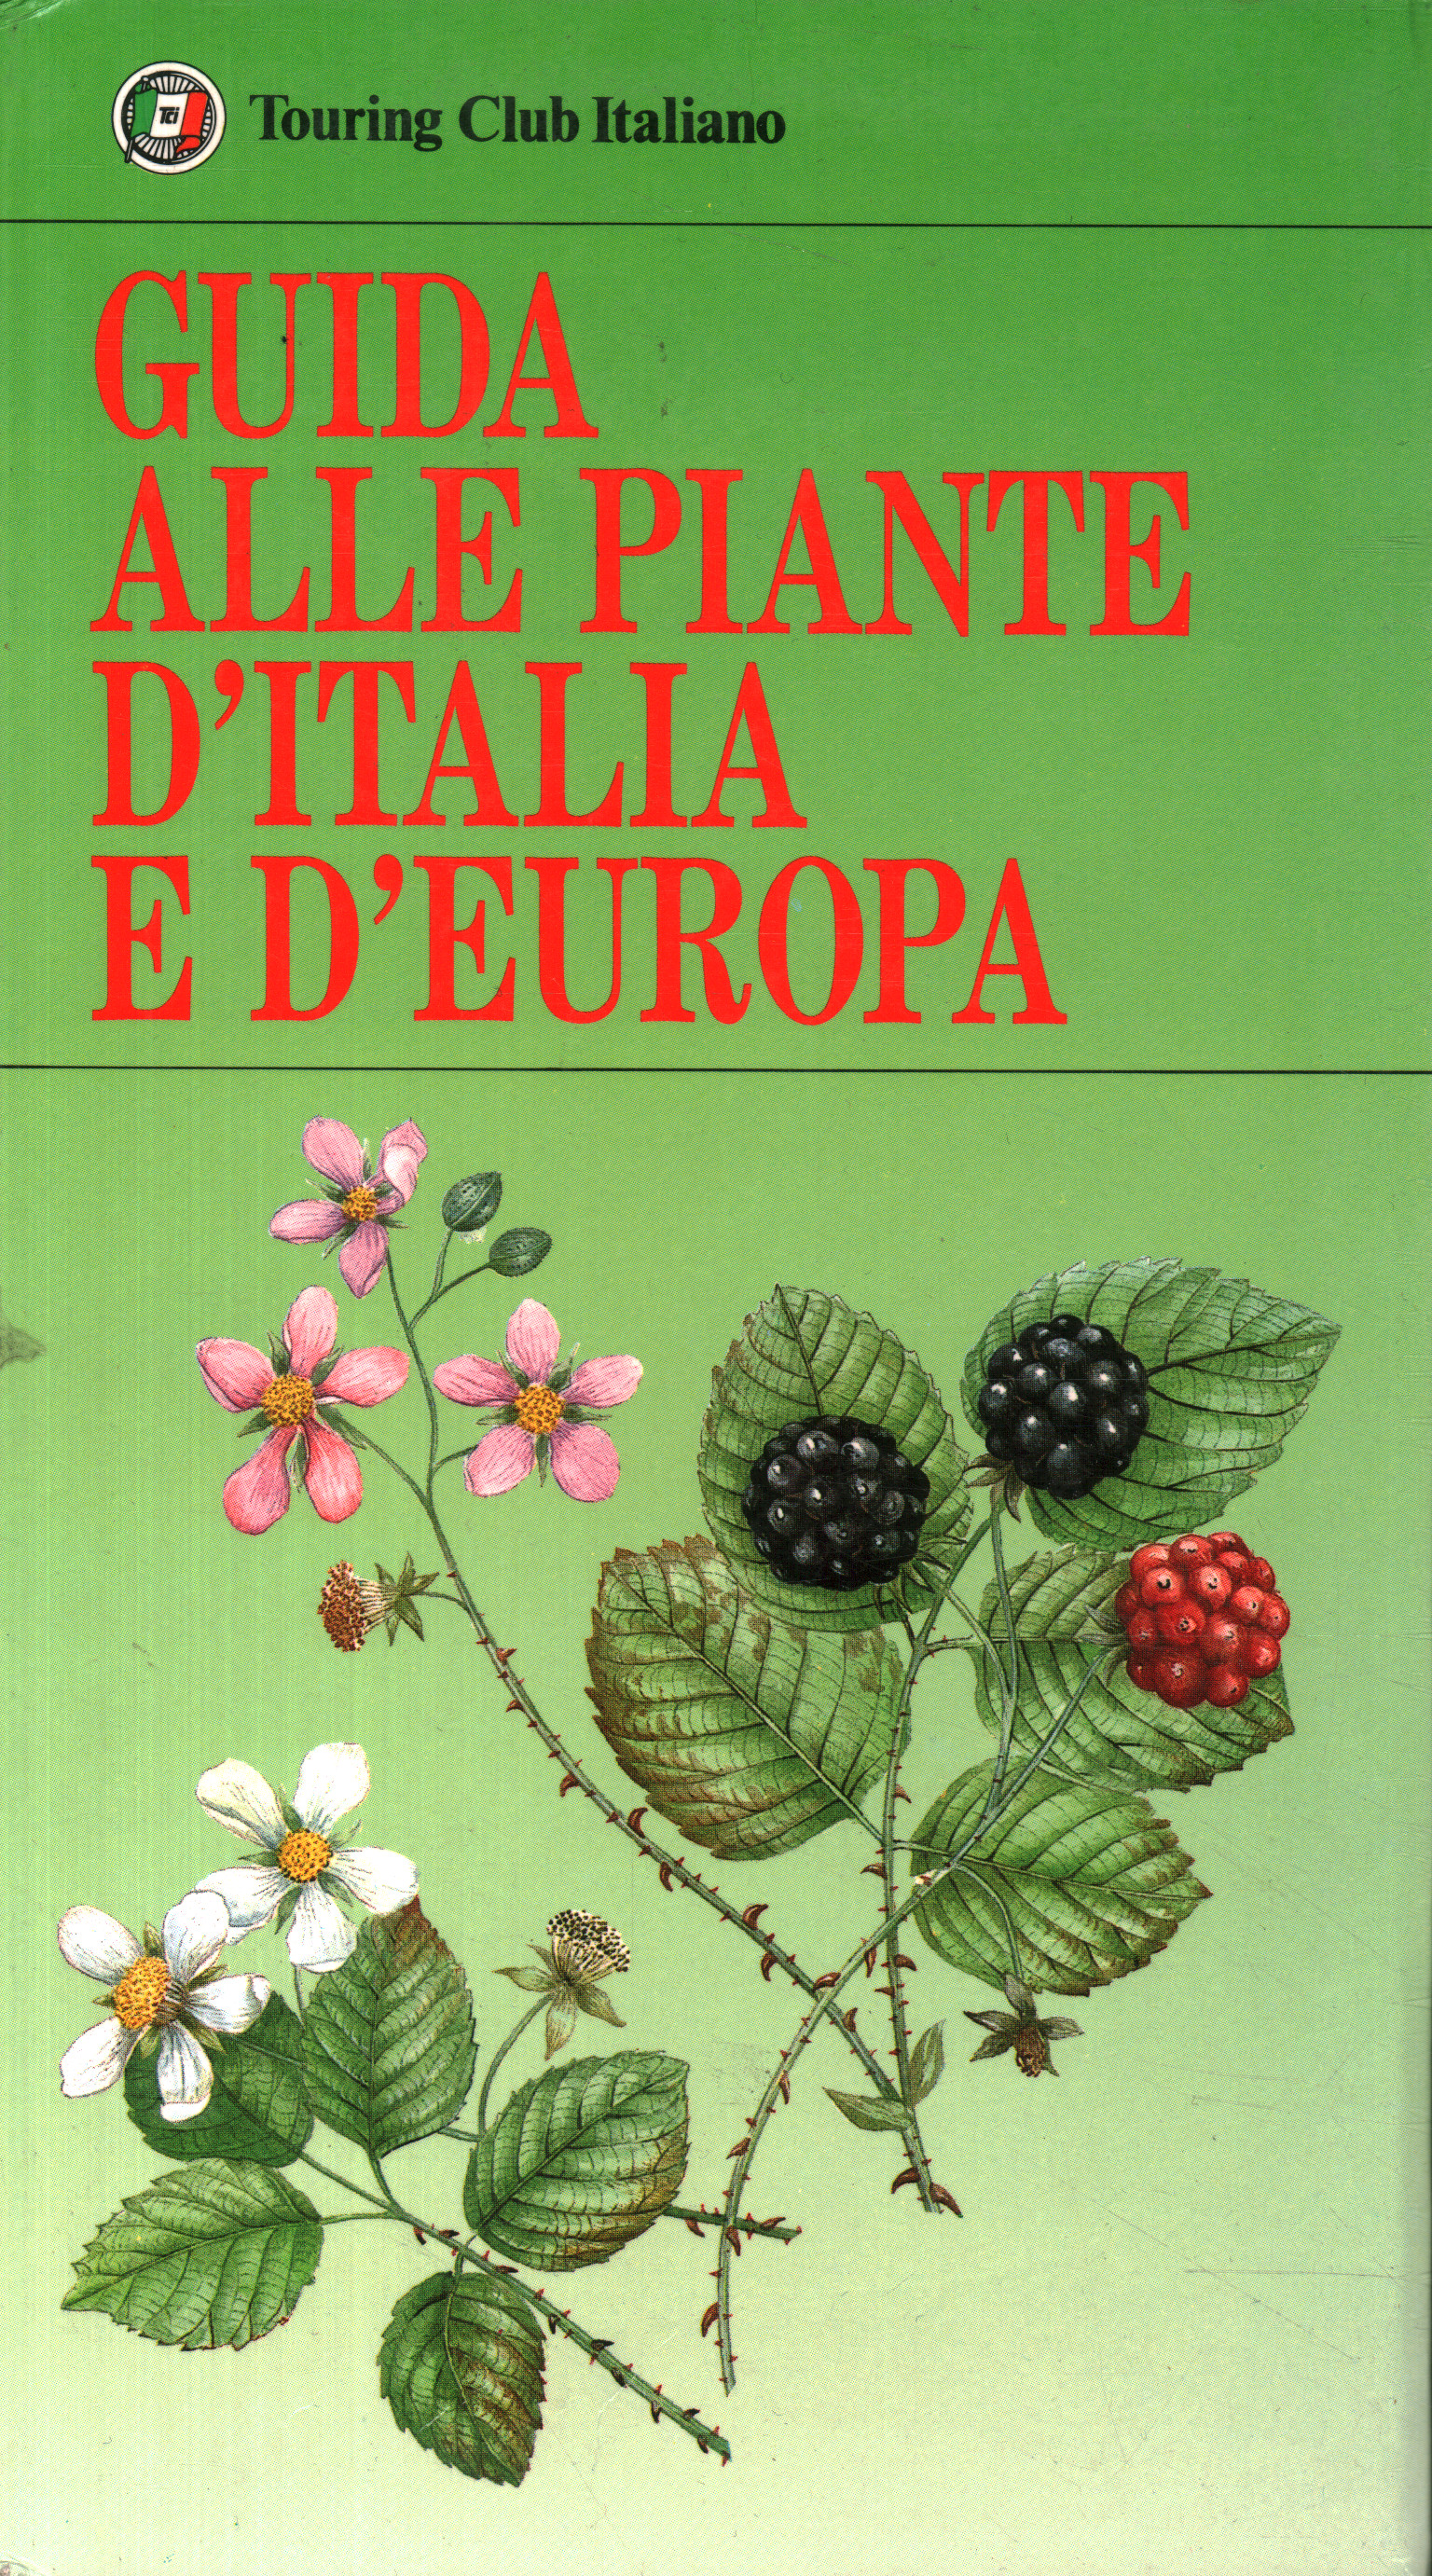 Guide to the plants of Italy e